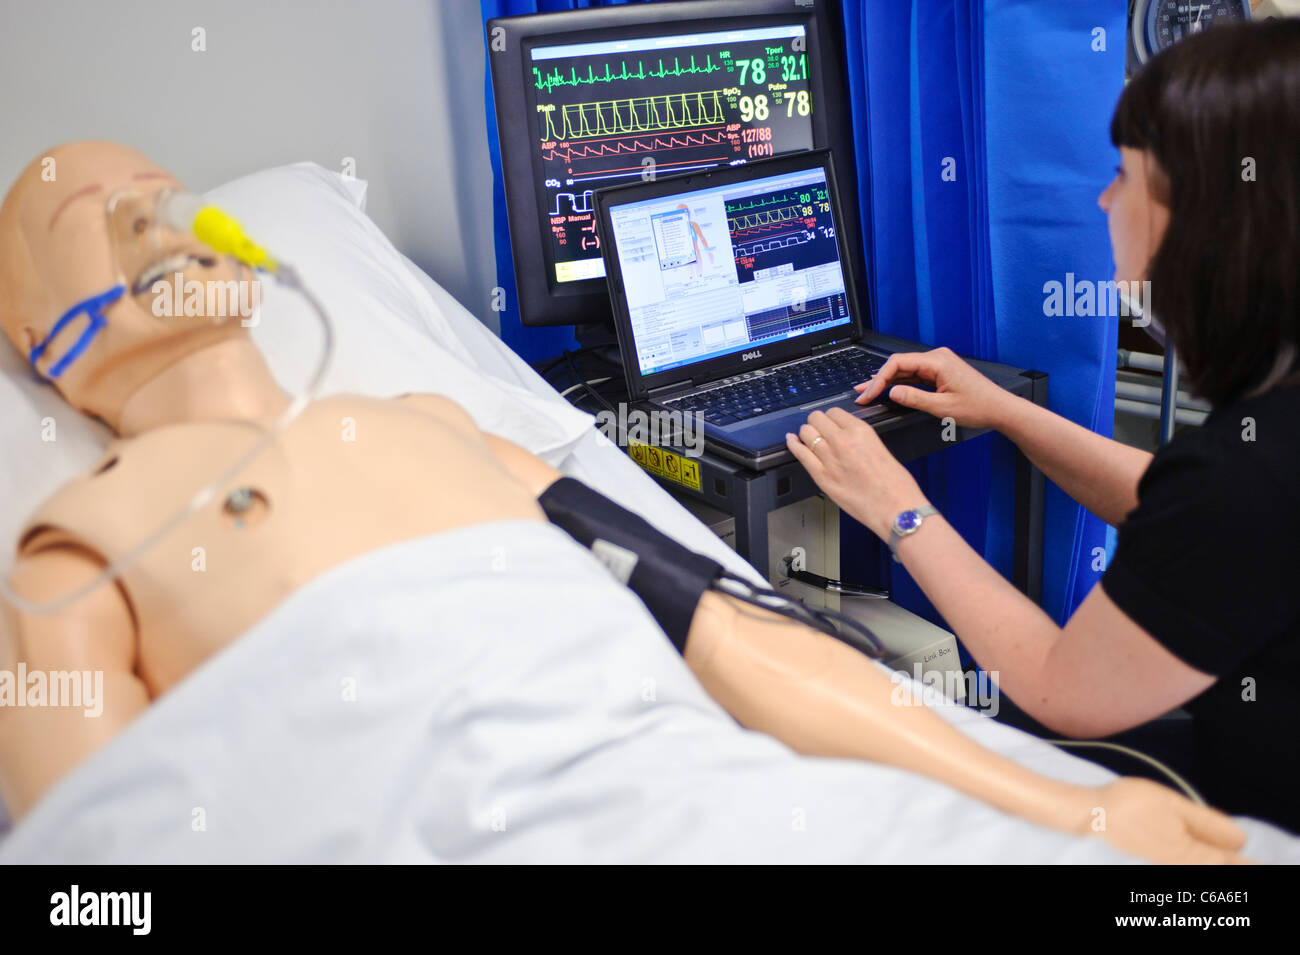 nurse running simulated dummy patient mannequin tests in hospital bed ward setting Stock Photo